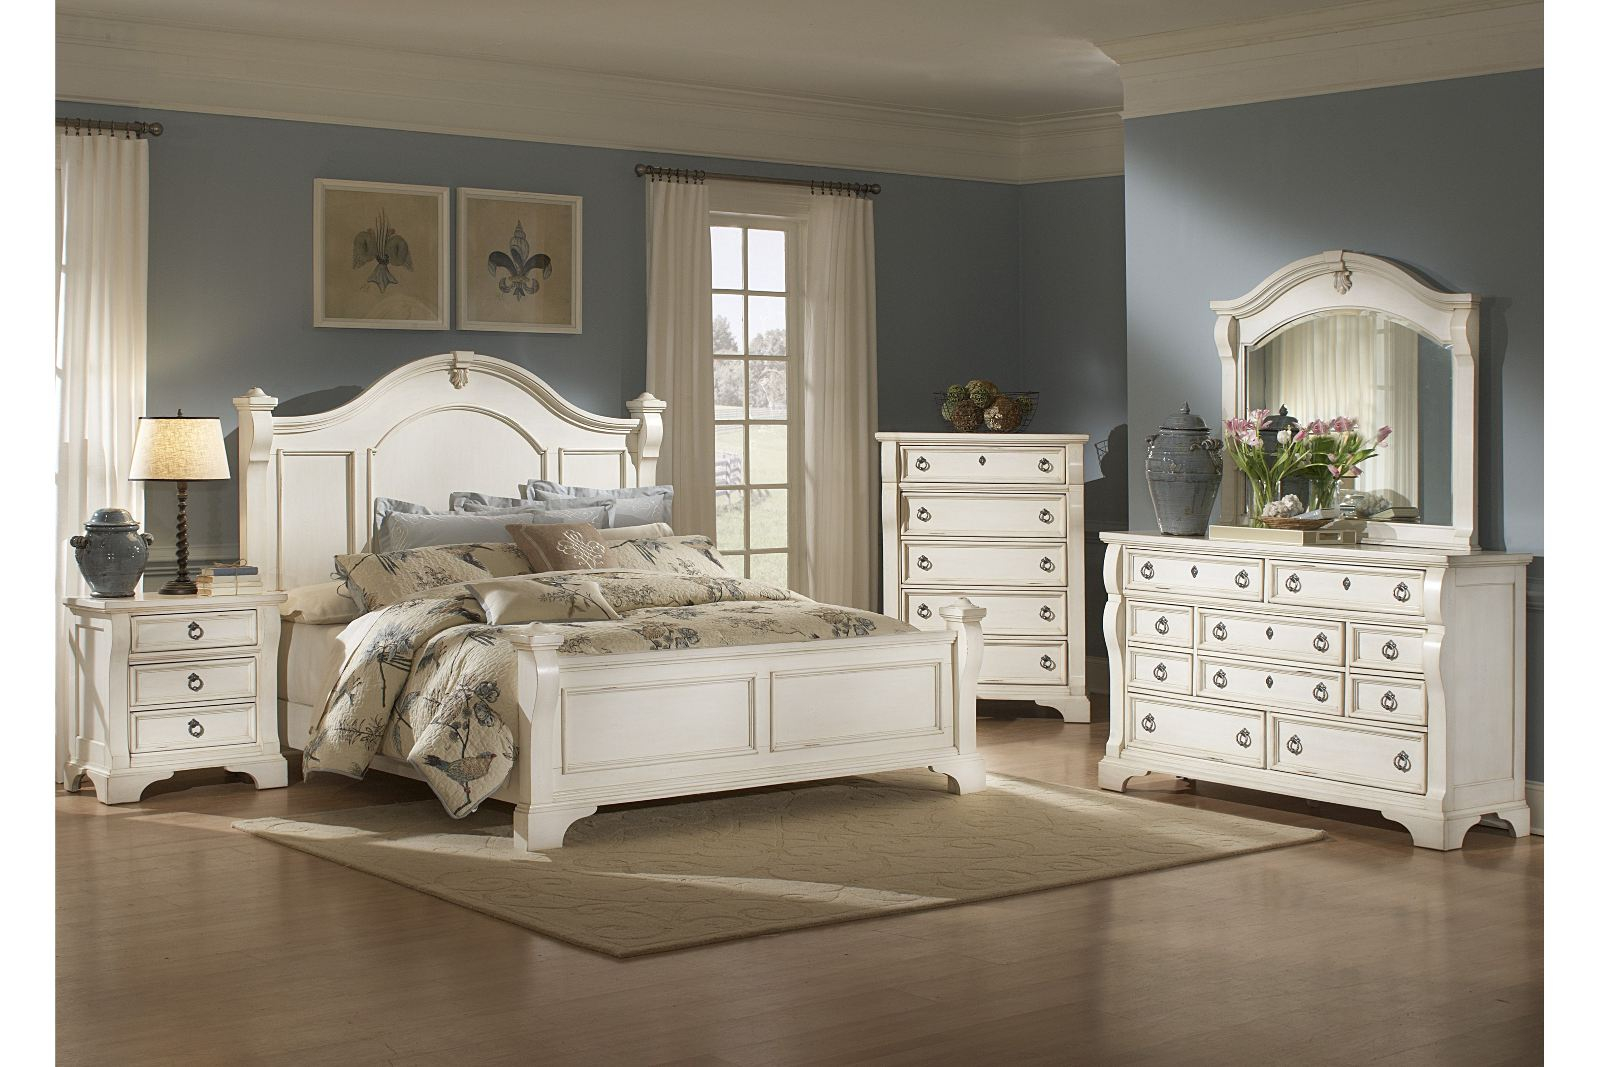 American Woodcrafters Heirloom Collection Poster Bedroom Set In Antique White 2910 in dimensions 1600 X 1067